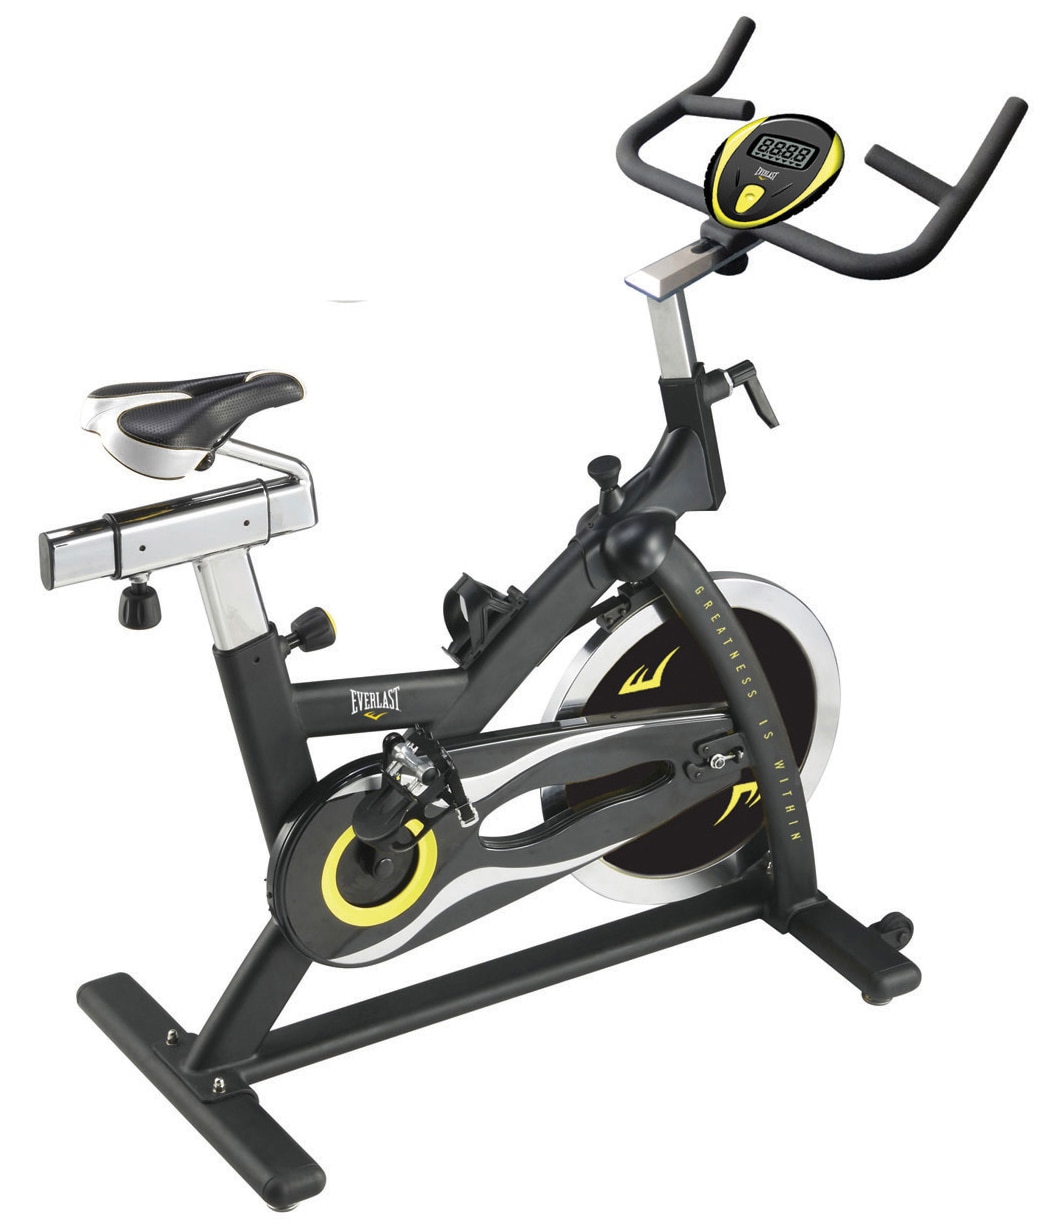 Everlast M90 Indoor Cycle Reviews : The 15 Best Indoor Cycling Bikes In 2021 Reviews Comparison ...